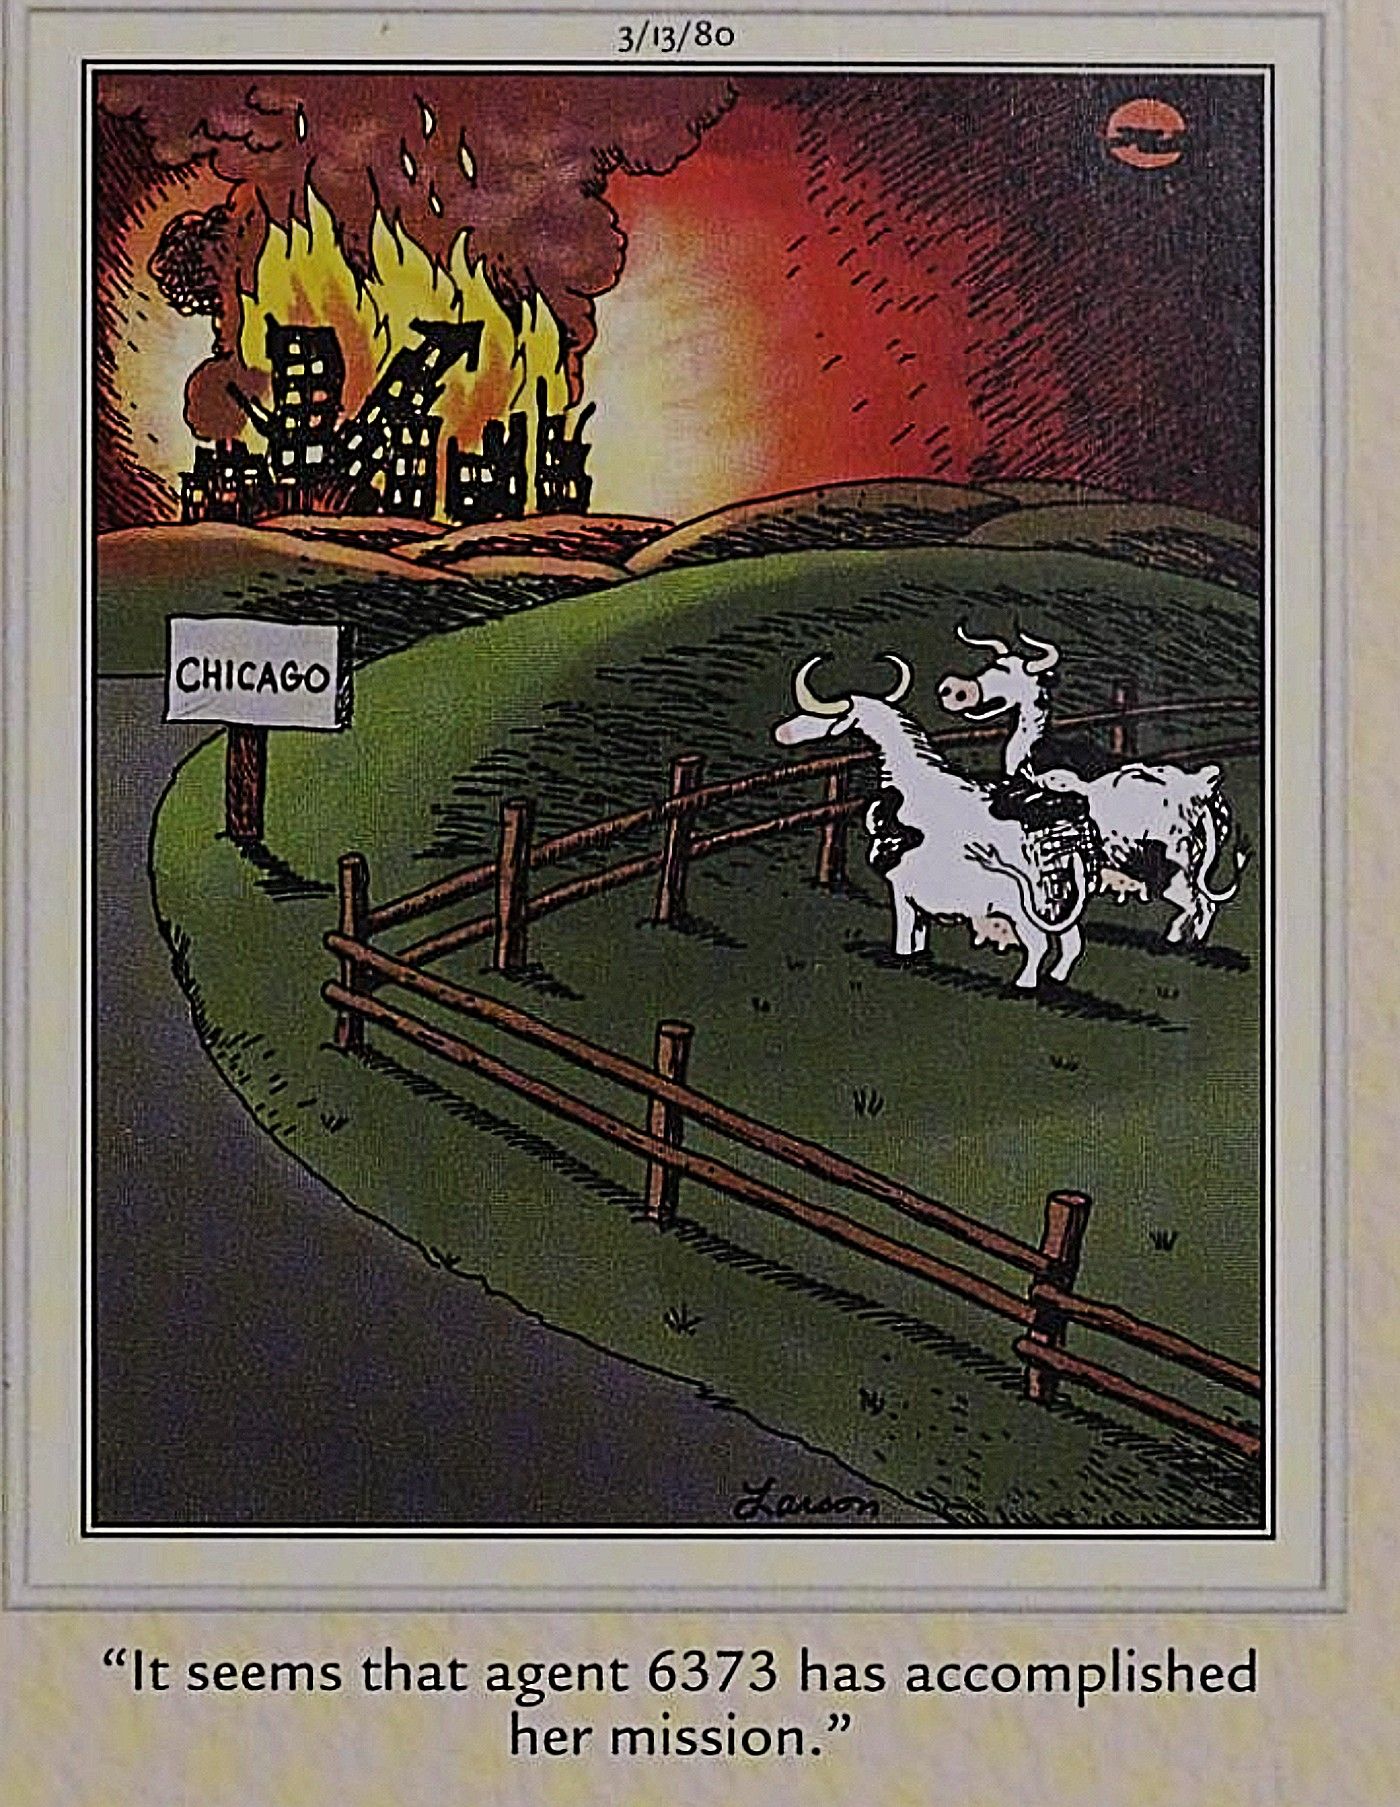 Far Side, Great Chicago Gire was a deliberate cow sabotage operation